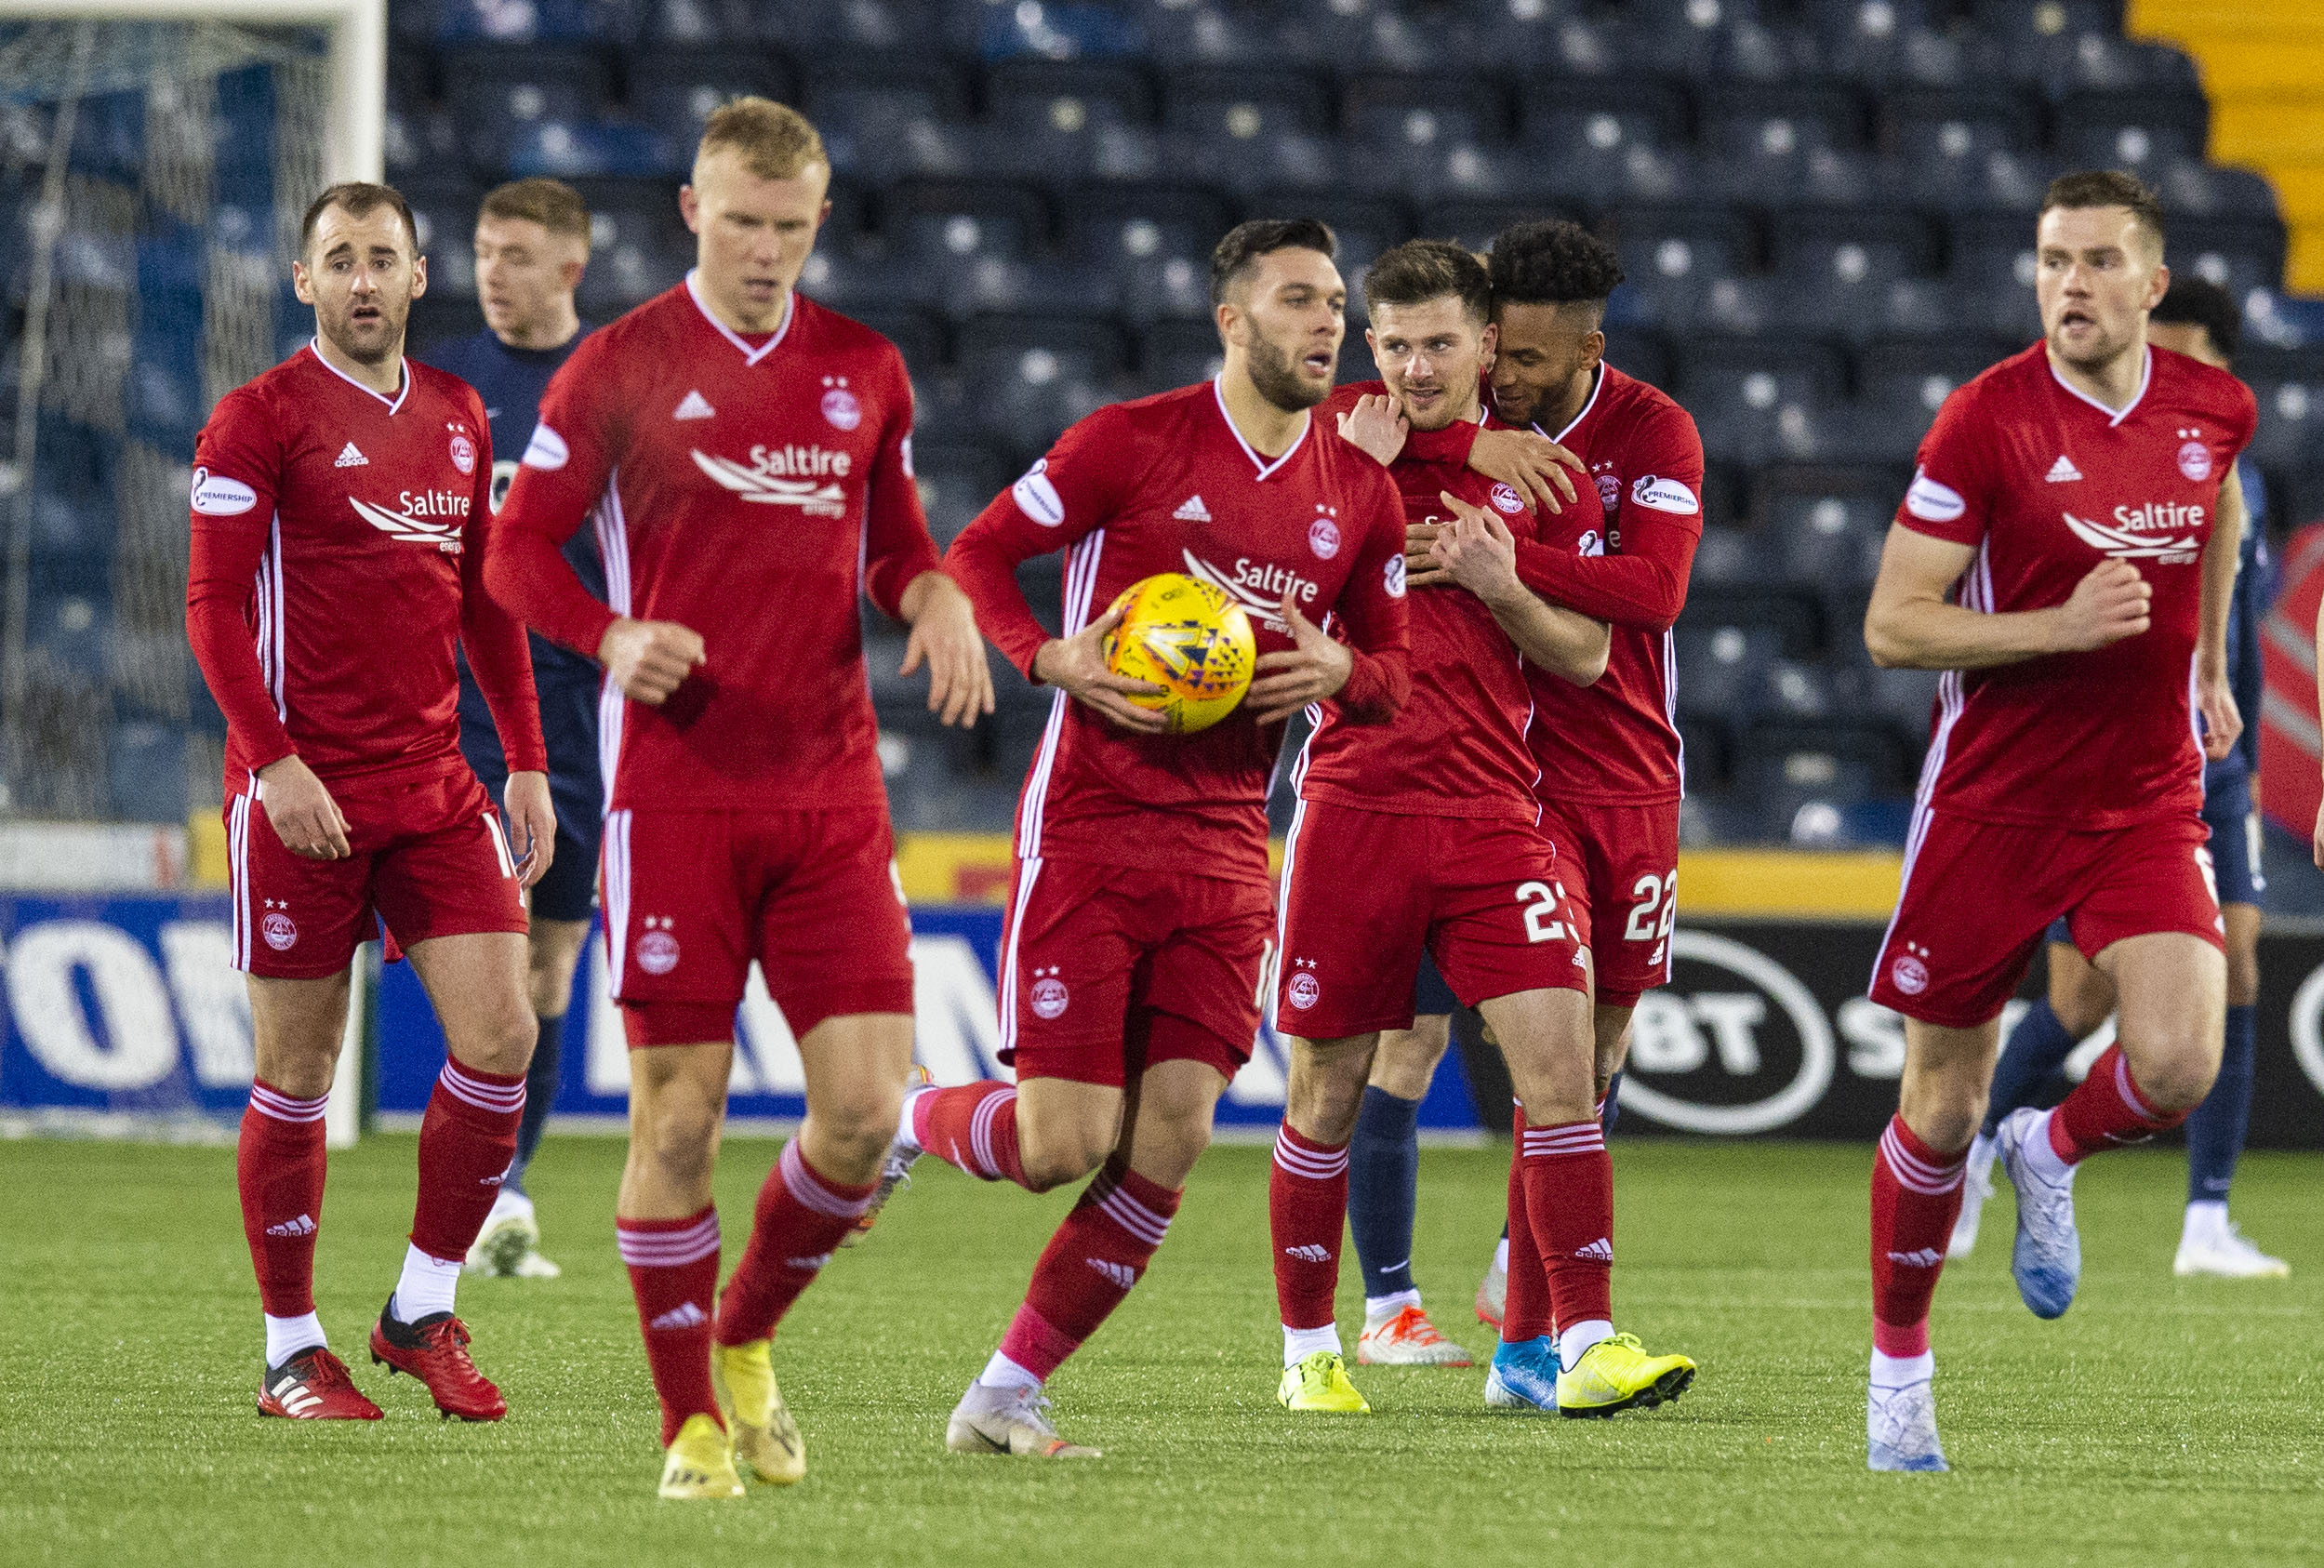 Aberdeen's players hurry to get play restarted after drawing level.